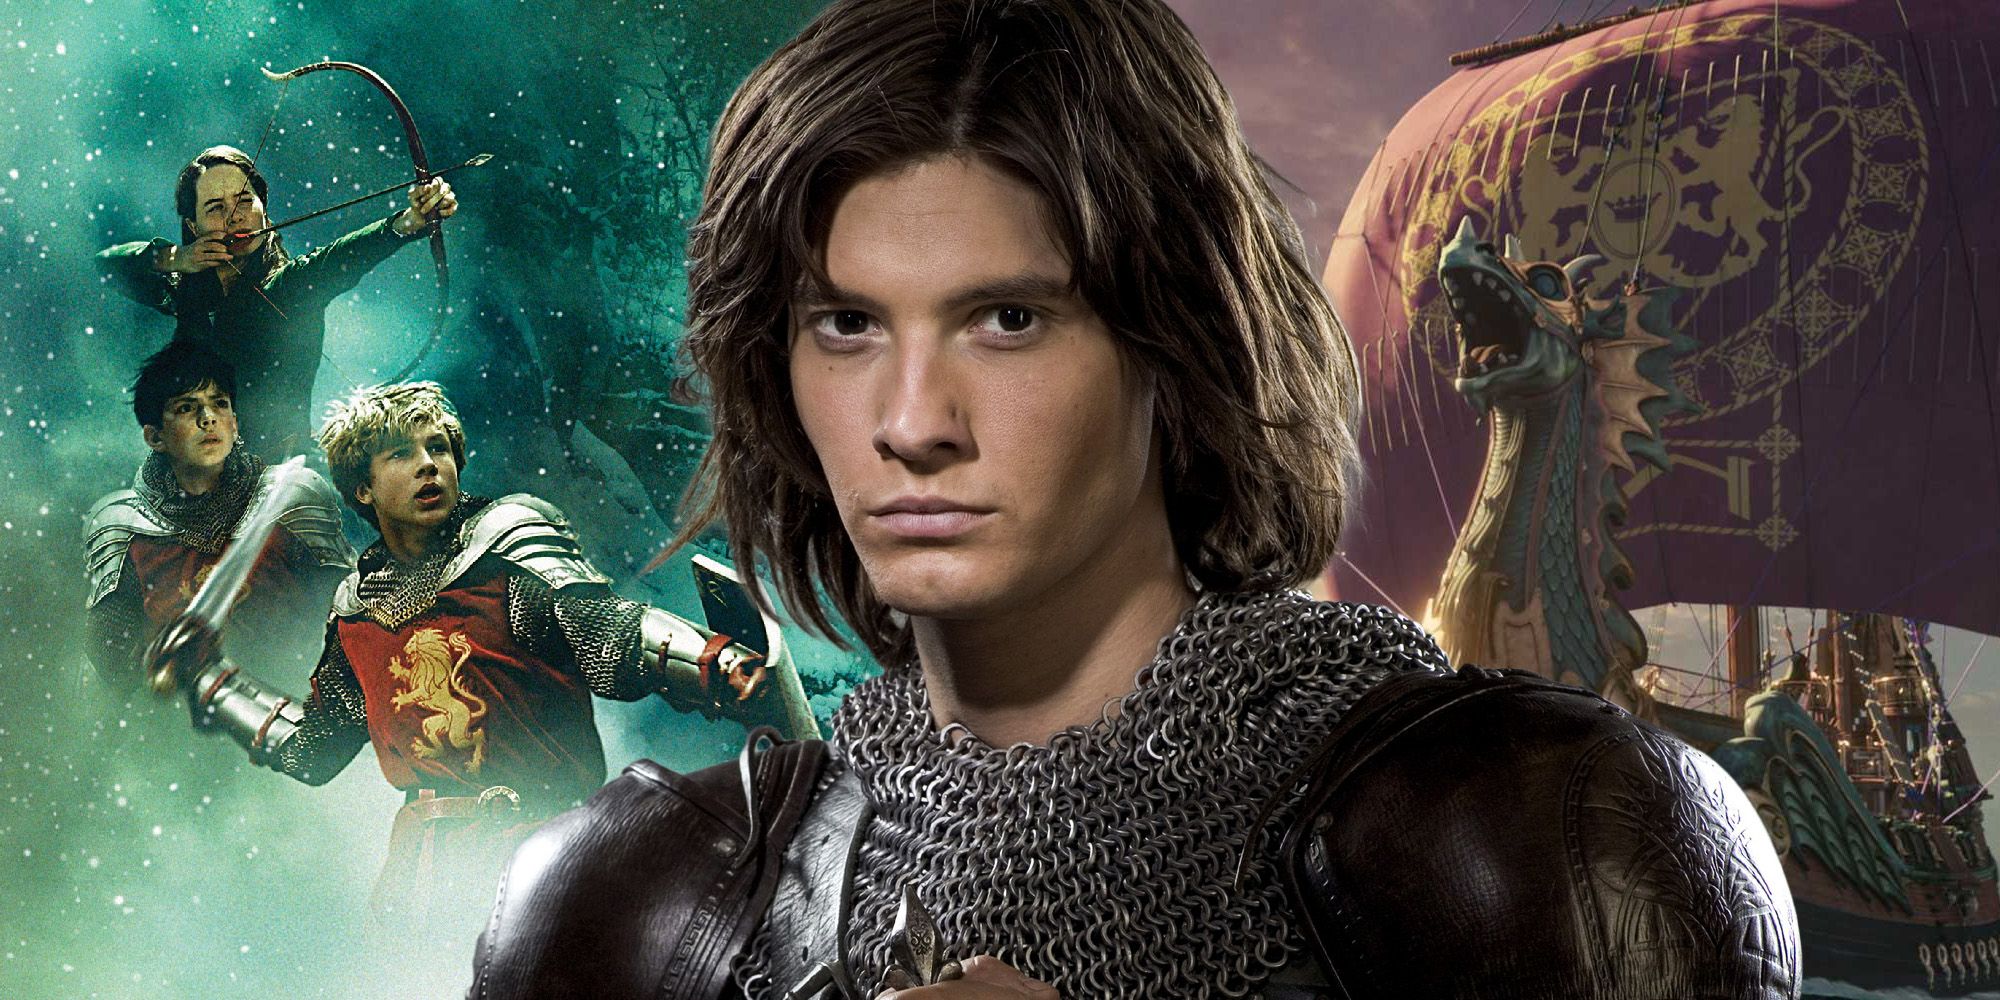 Prince Caspian in the original Chronicles of Narnia movies.